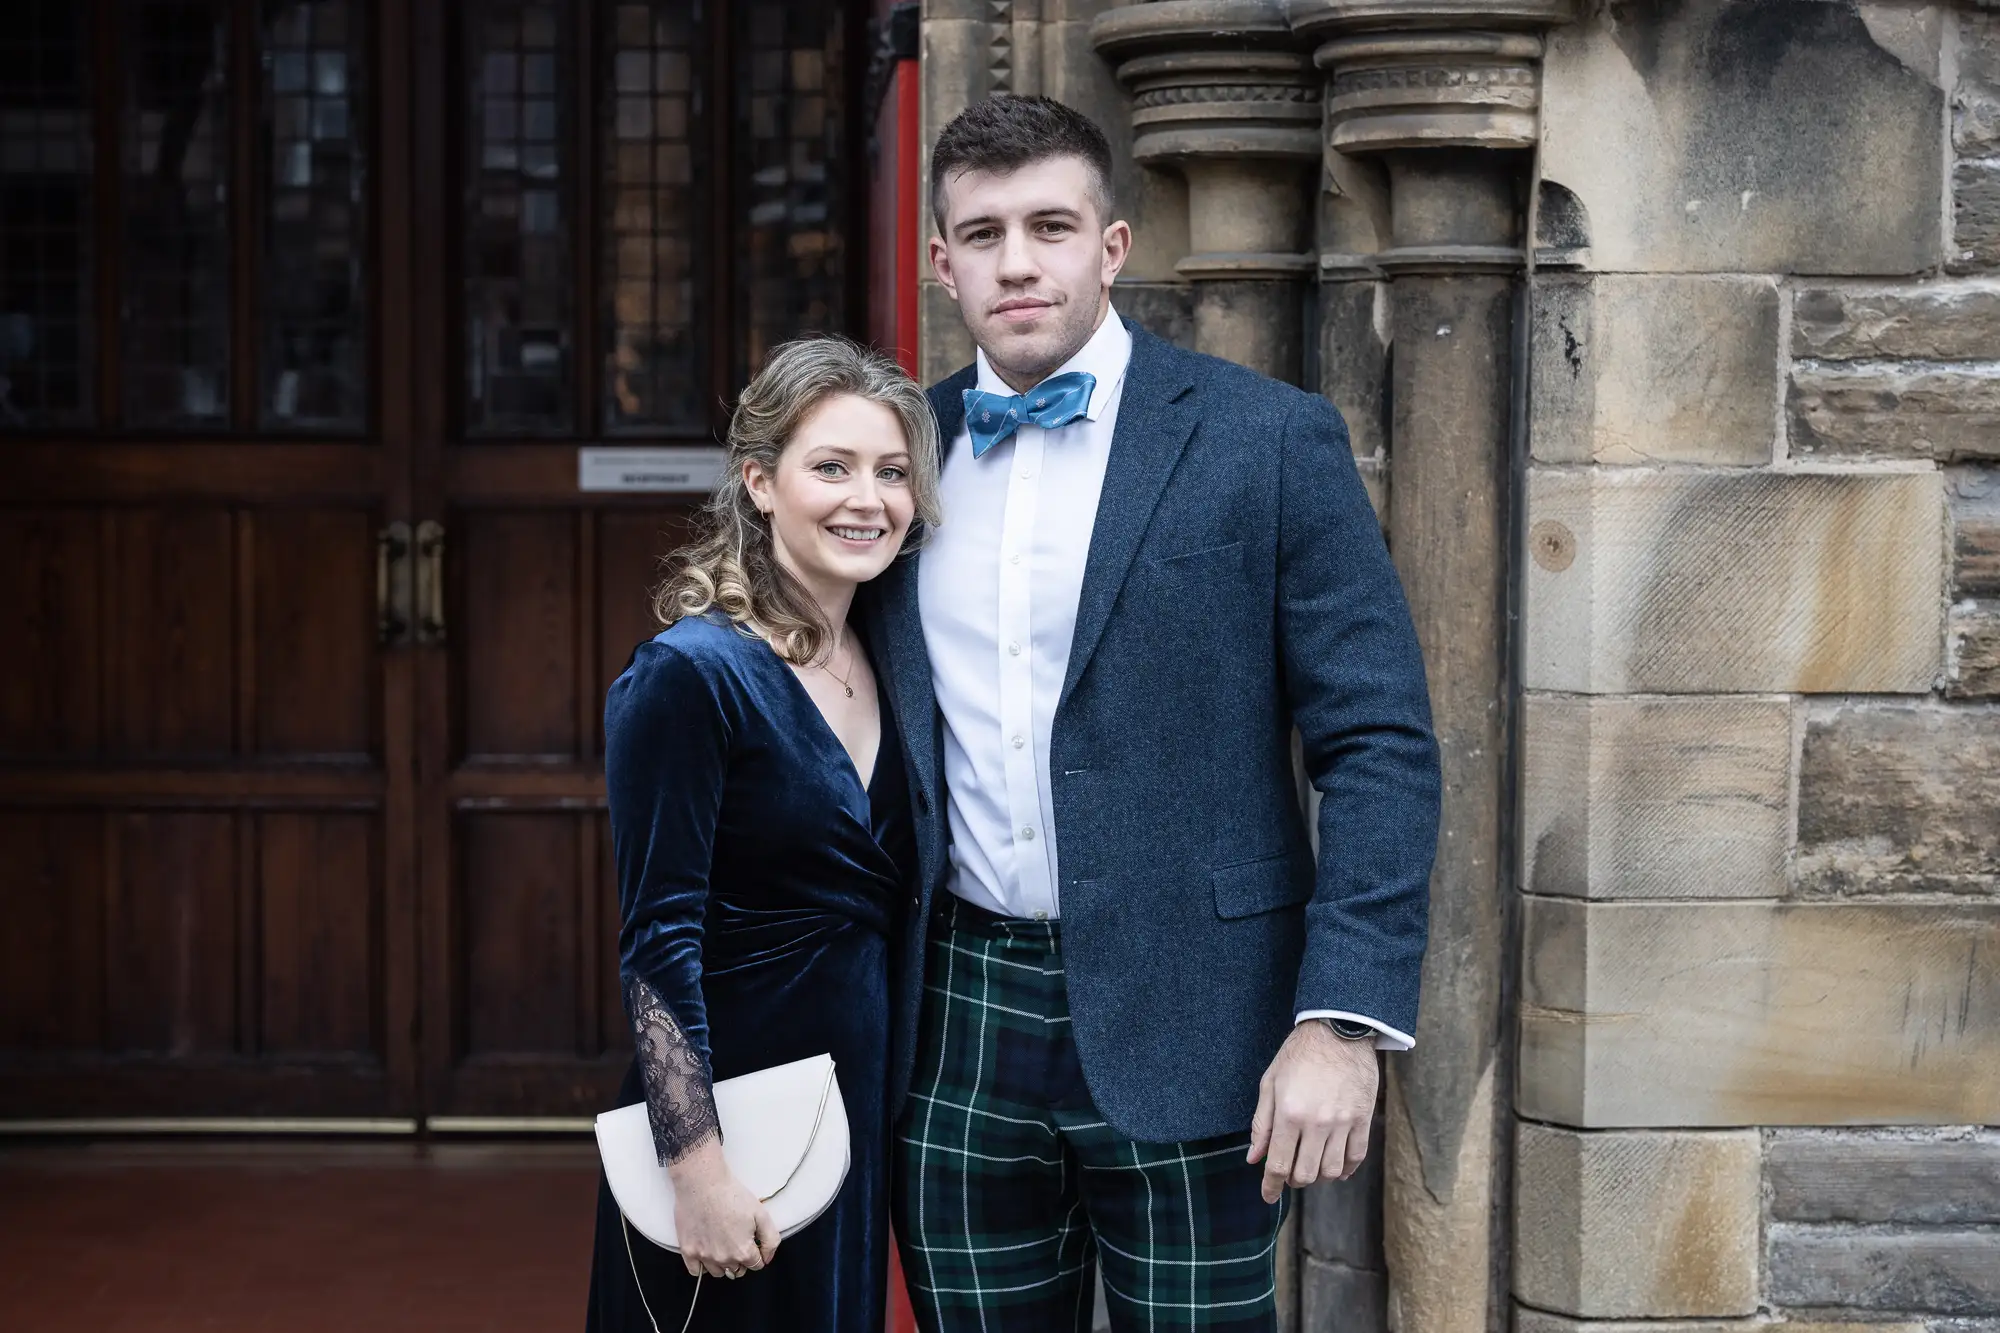 A couple posing in formal attire, the woman in a blue velvet dress and the man in a kilt and blazer, in front of a historic building's wooden doors.